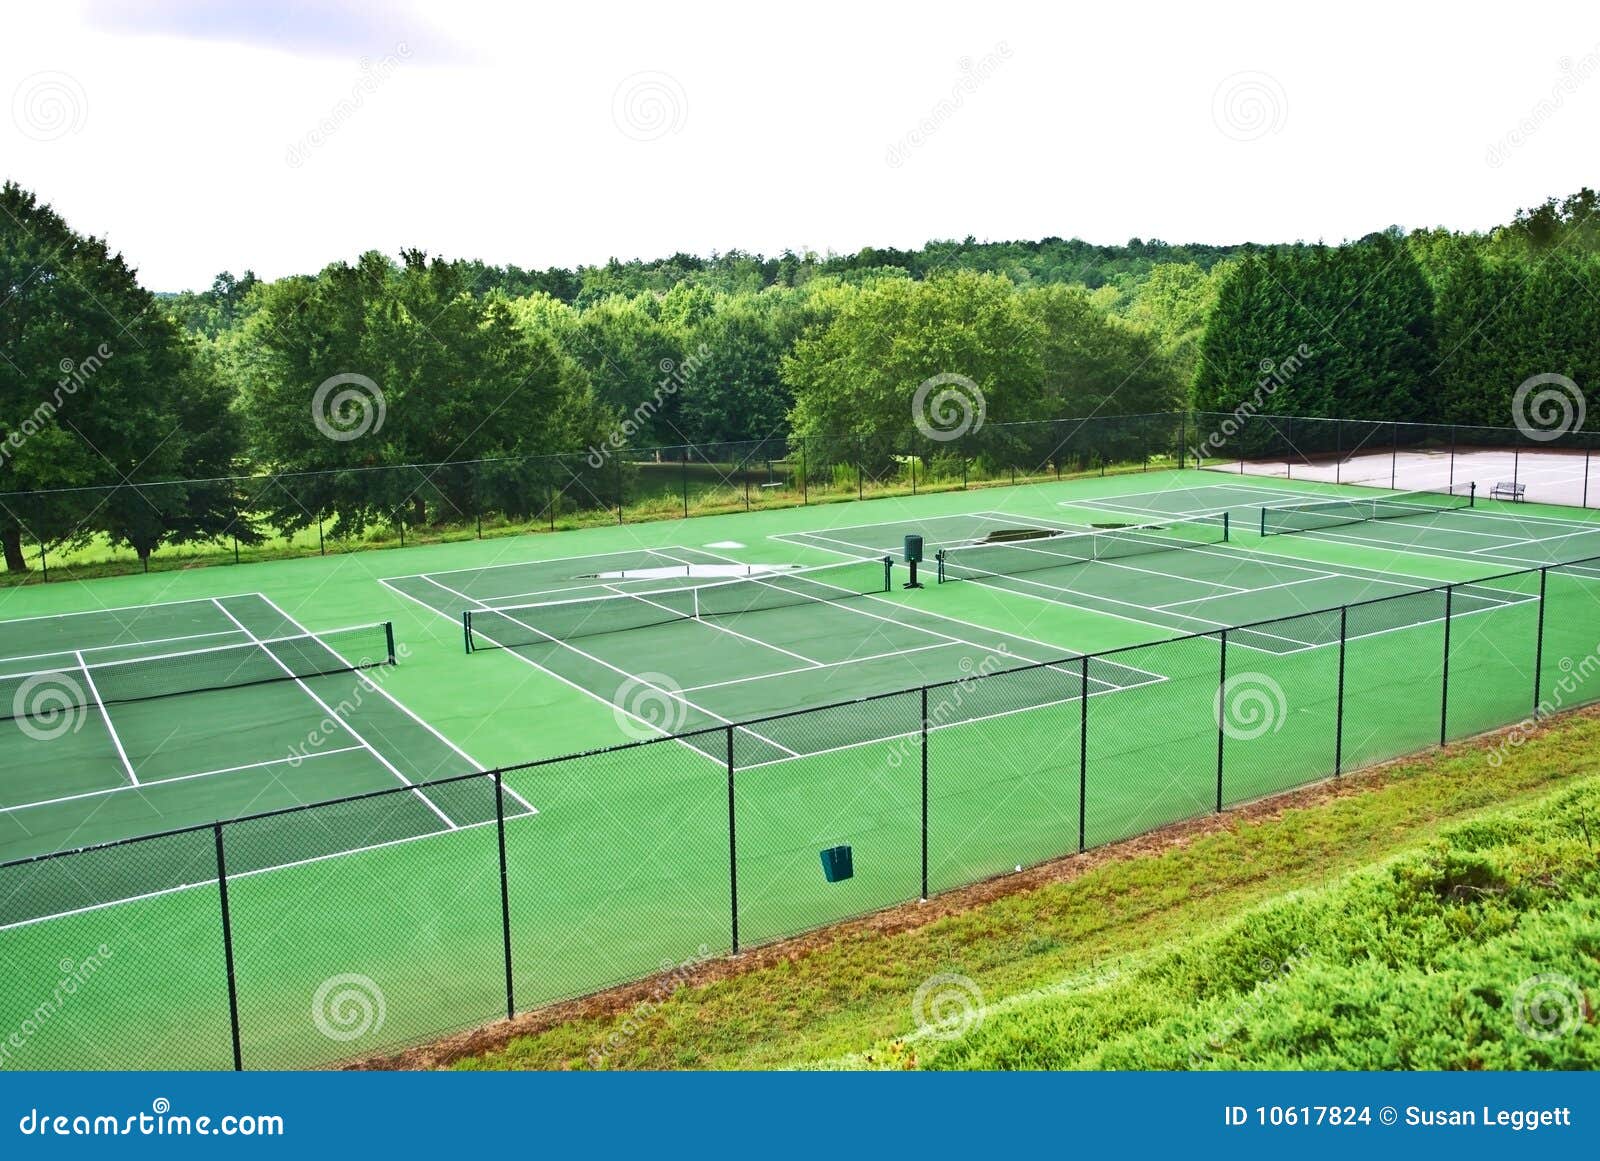 a row of empty tennis courts